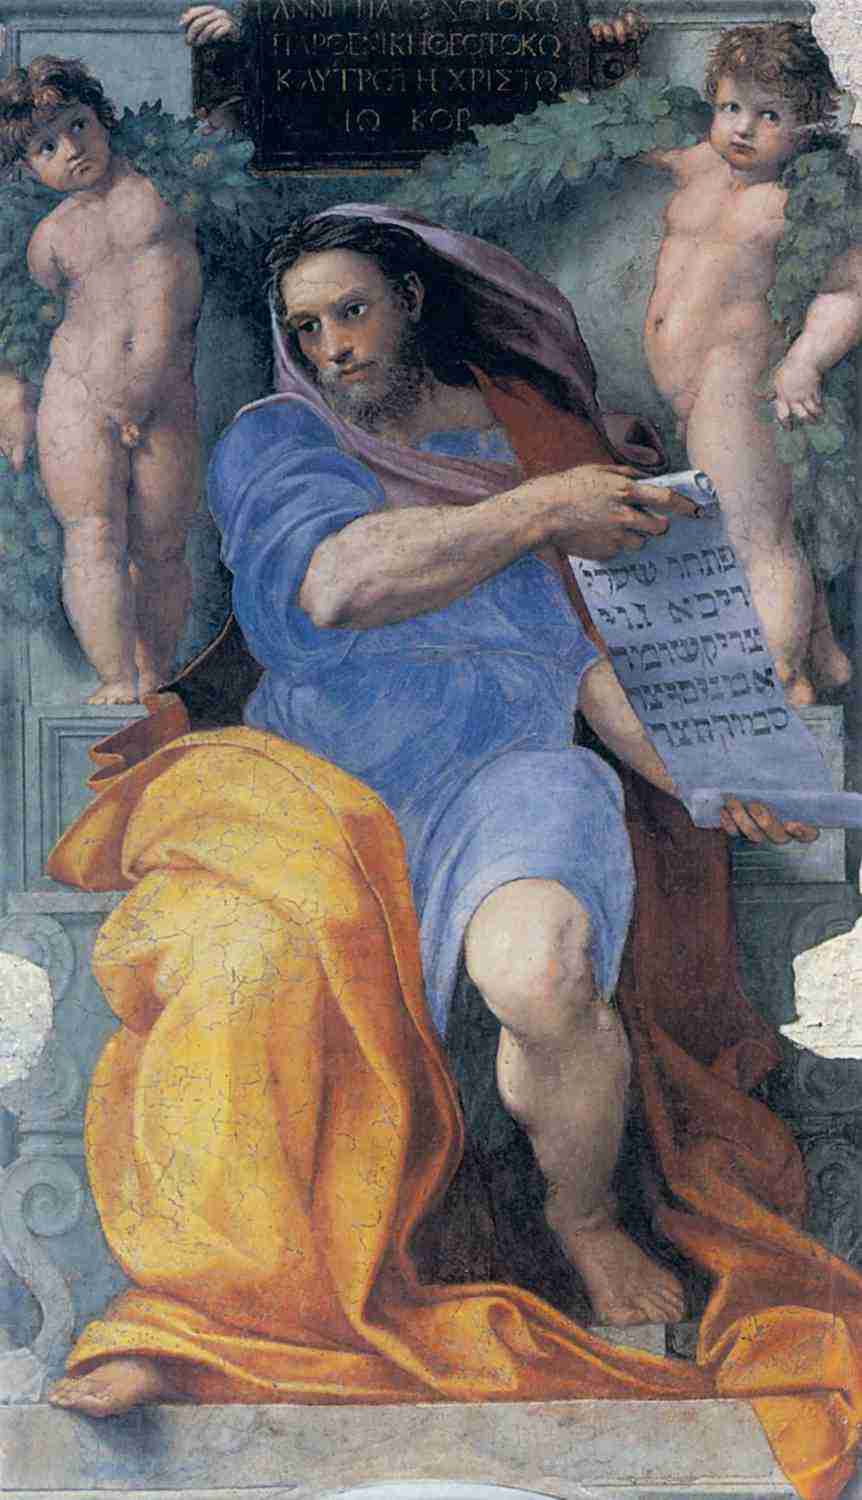 Raphael's Prophet Isaiah in the church of Sant'Agostino in Rome